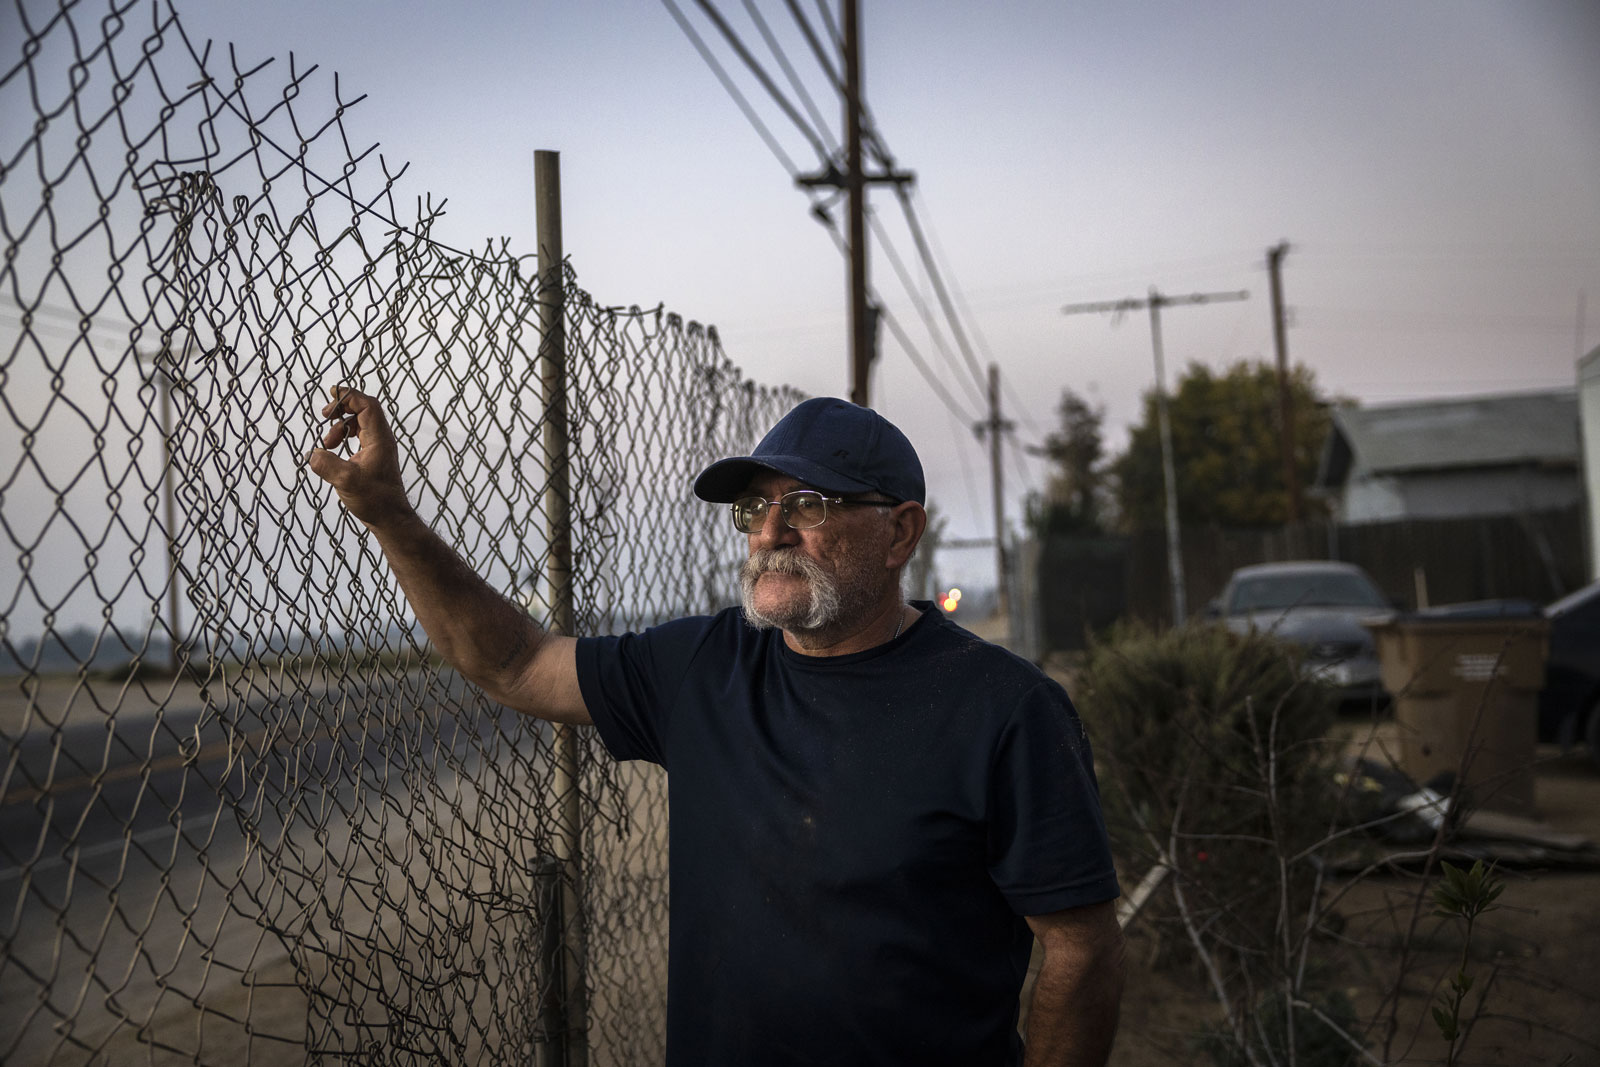 Luis Gomez looks out at the Kern Oil and Refining Co. refinery from his front yard in Fuller Acres.